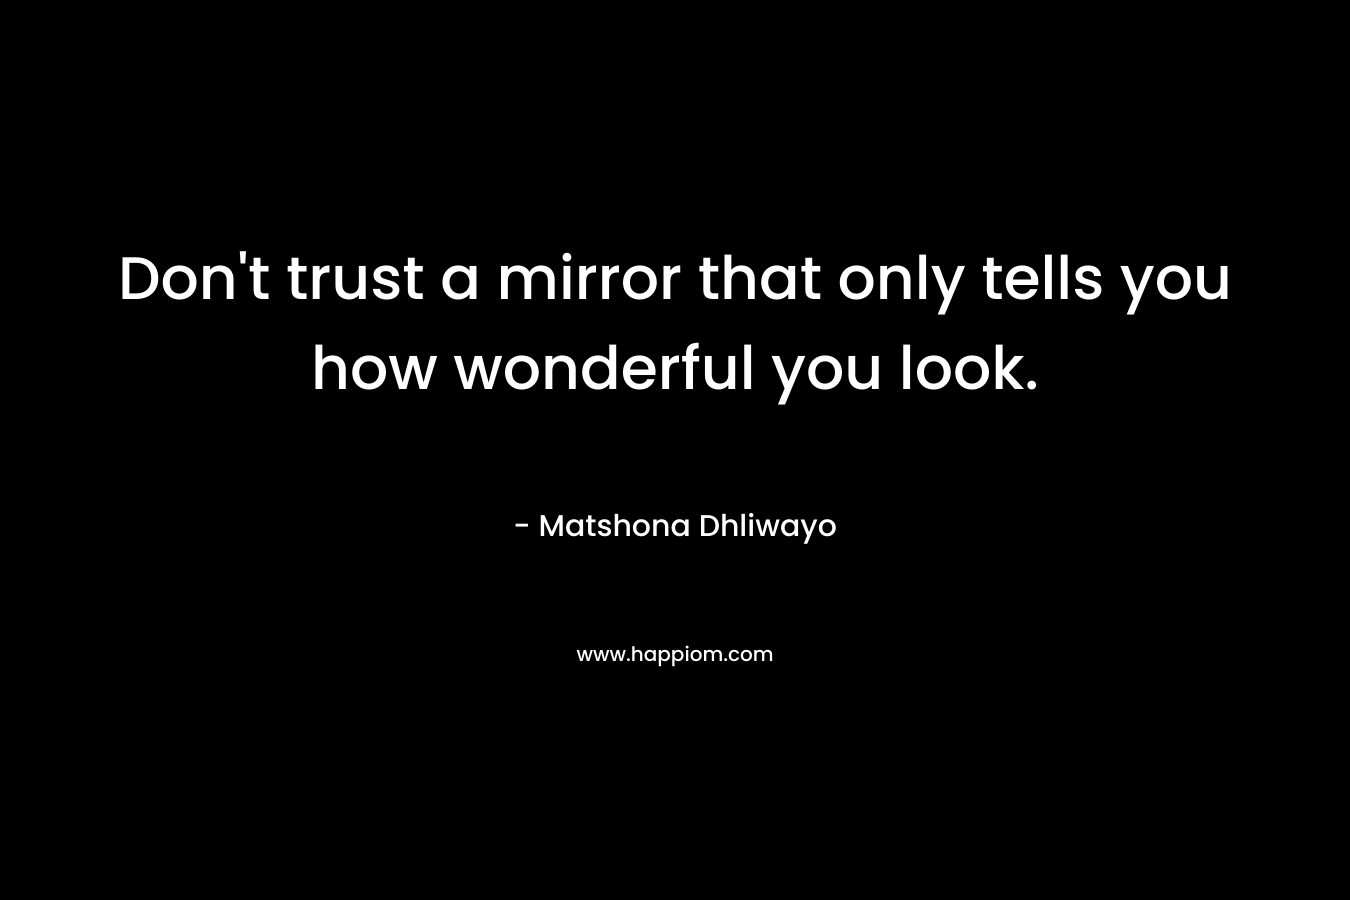 Don't trust a mirror that only tells you how wonderful you look.